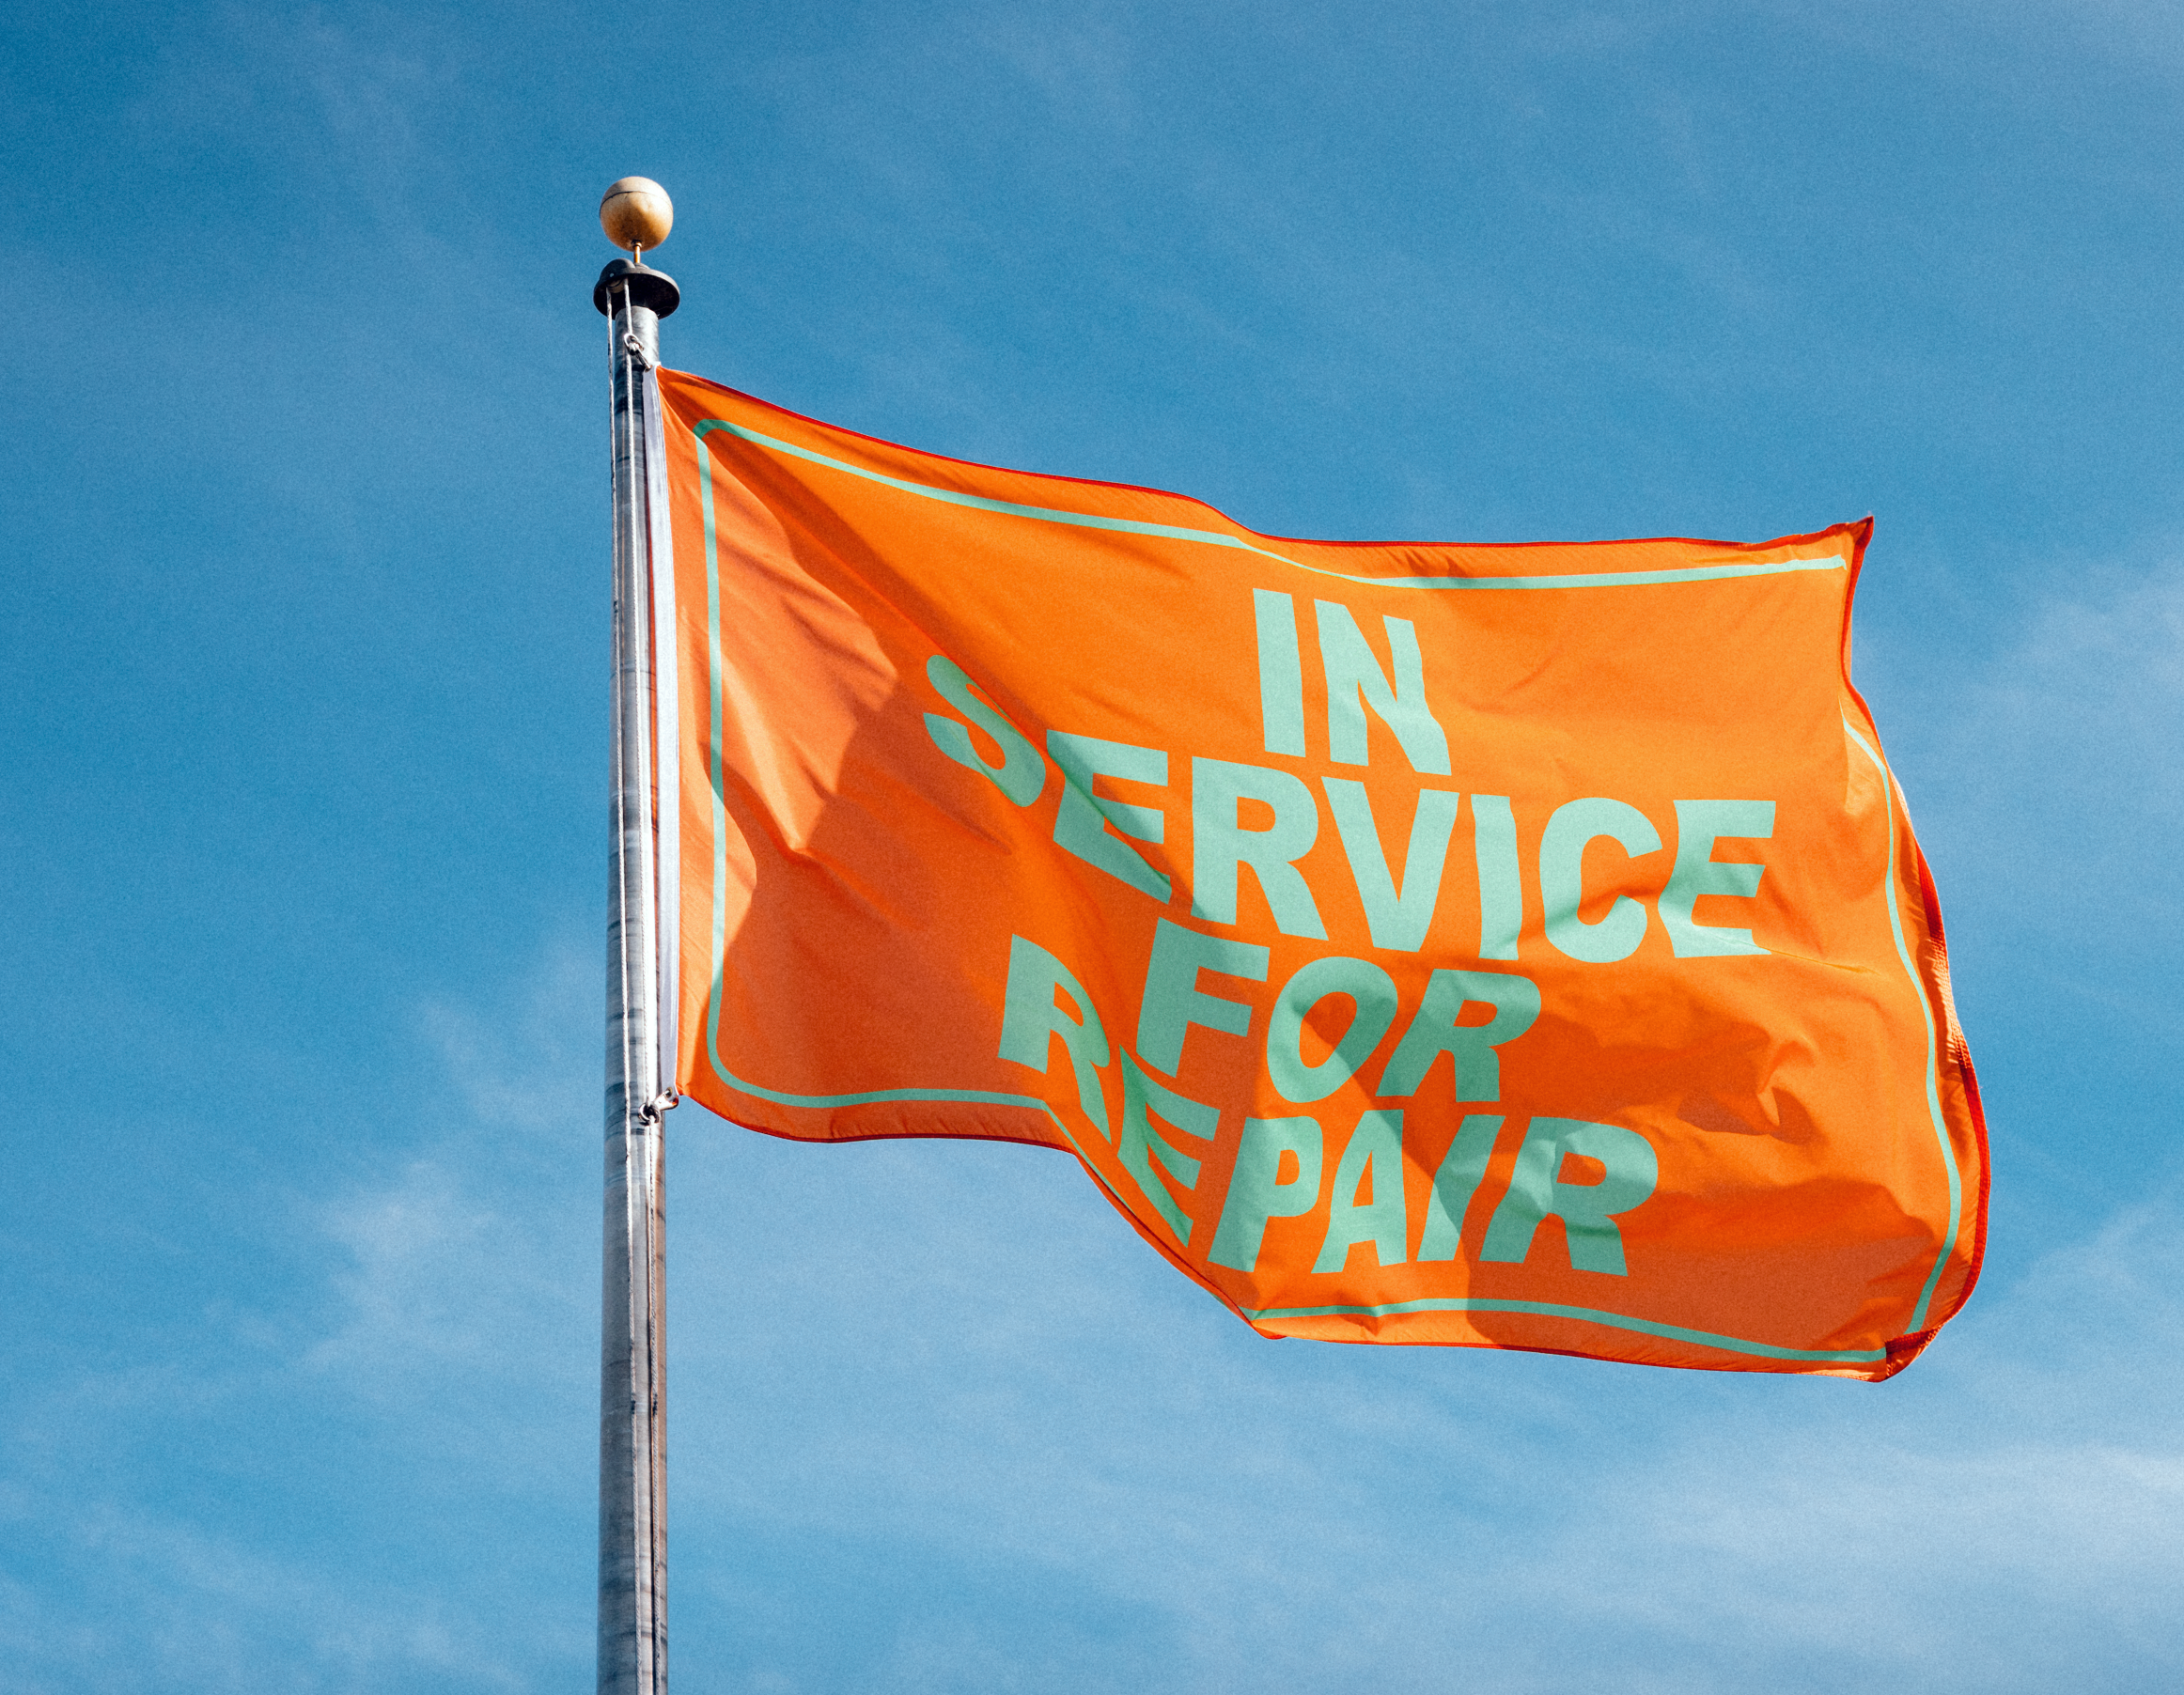 An orange flag waving in the wind, with the words IN SERVICE FOR REPAIR printed in large block letters on the flag.